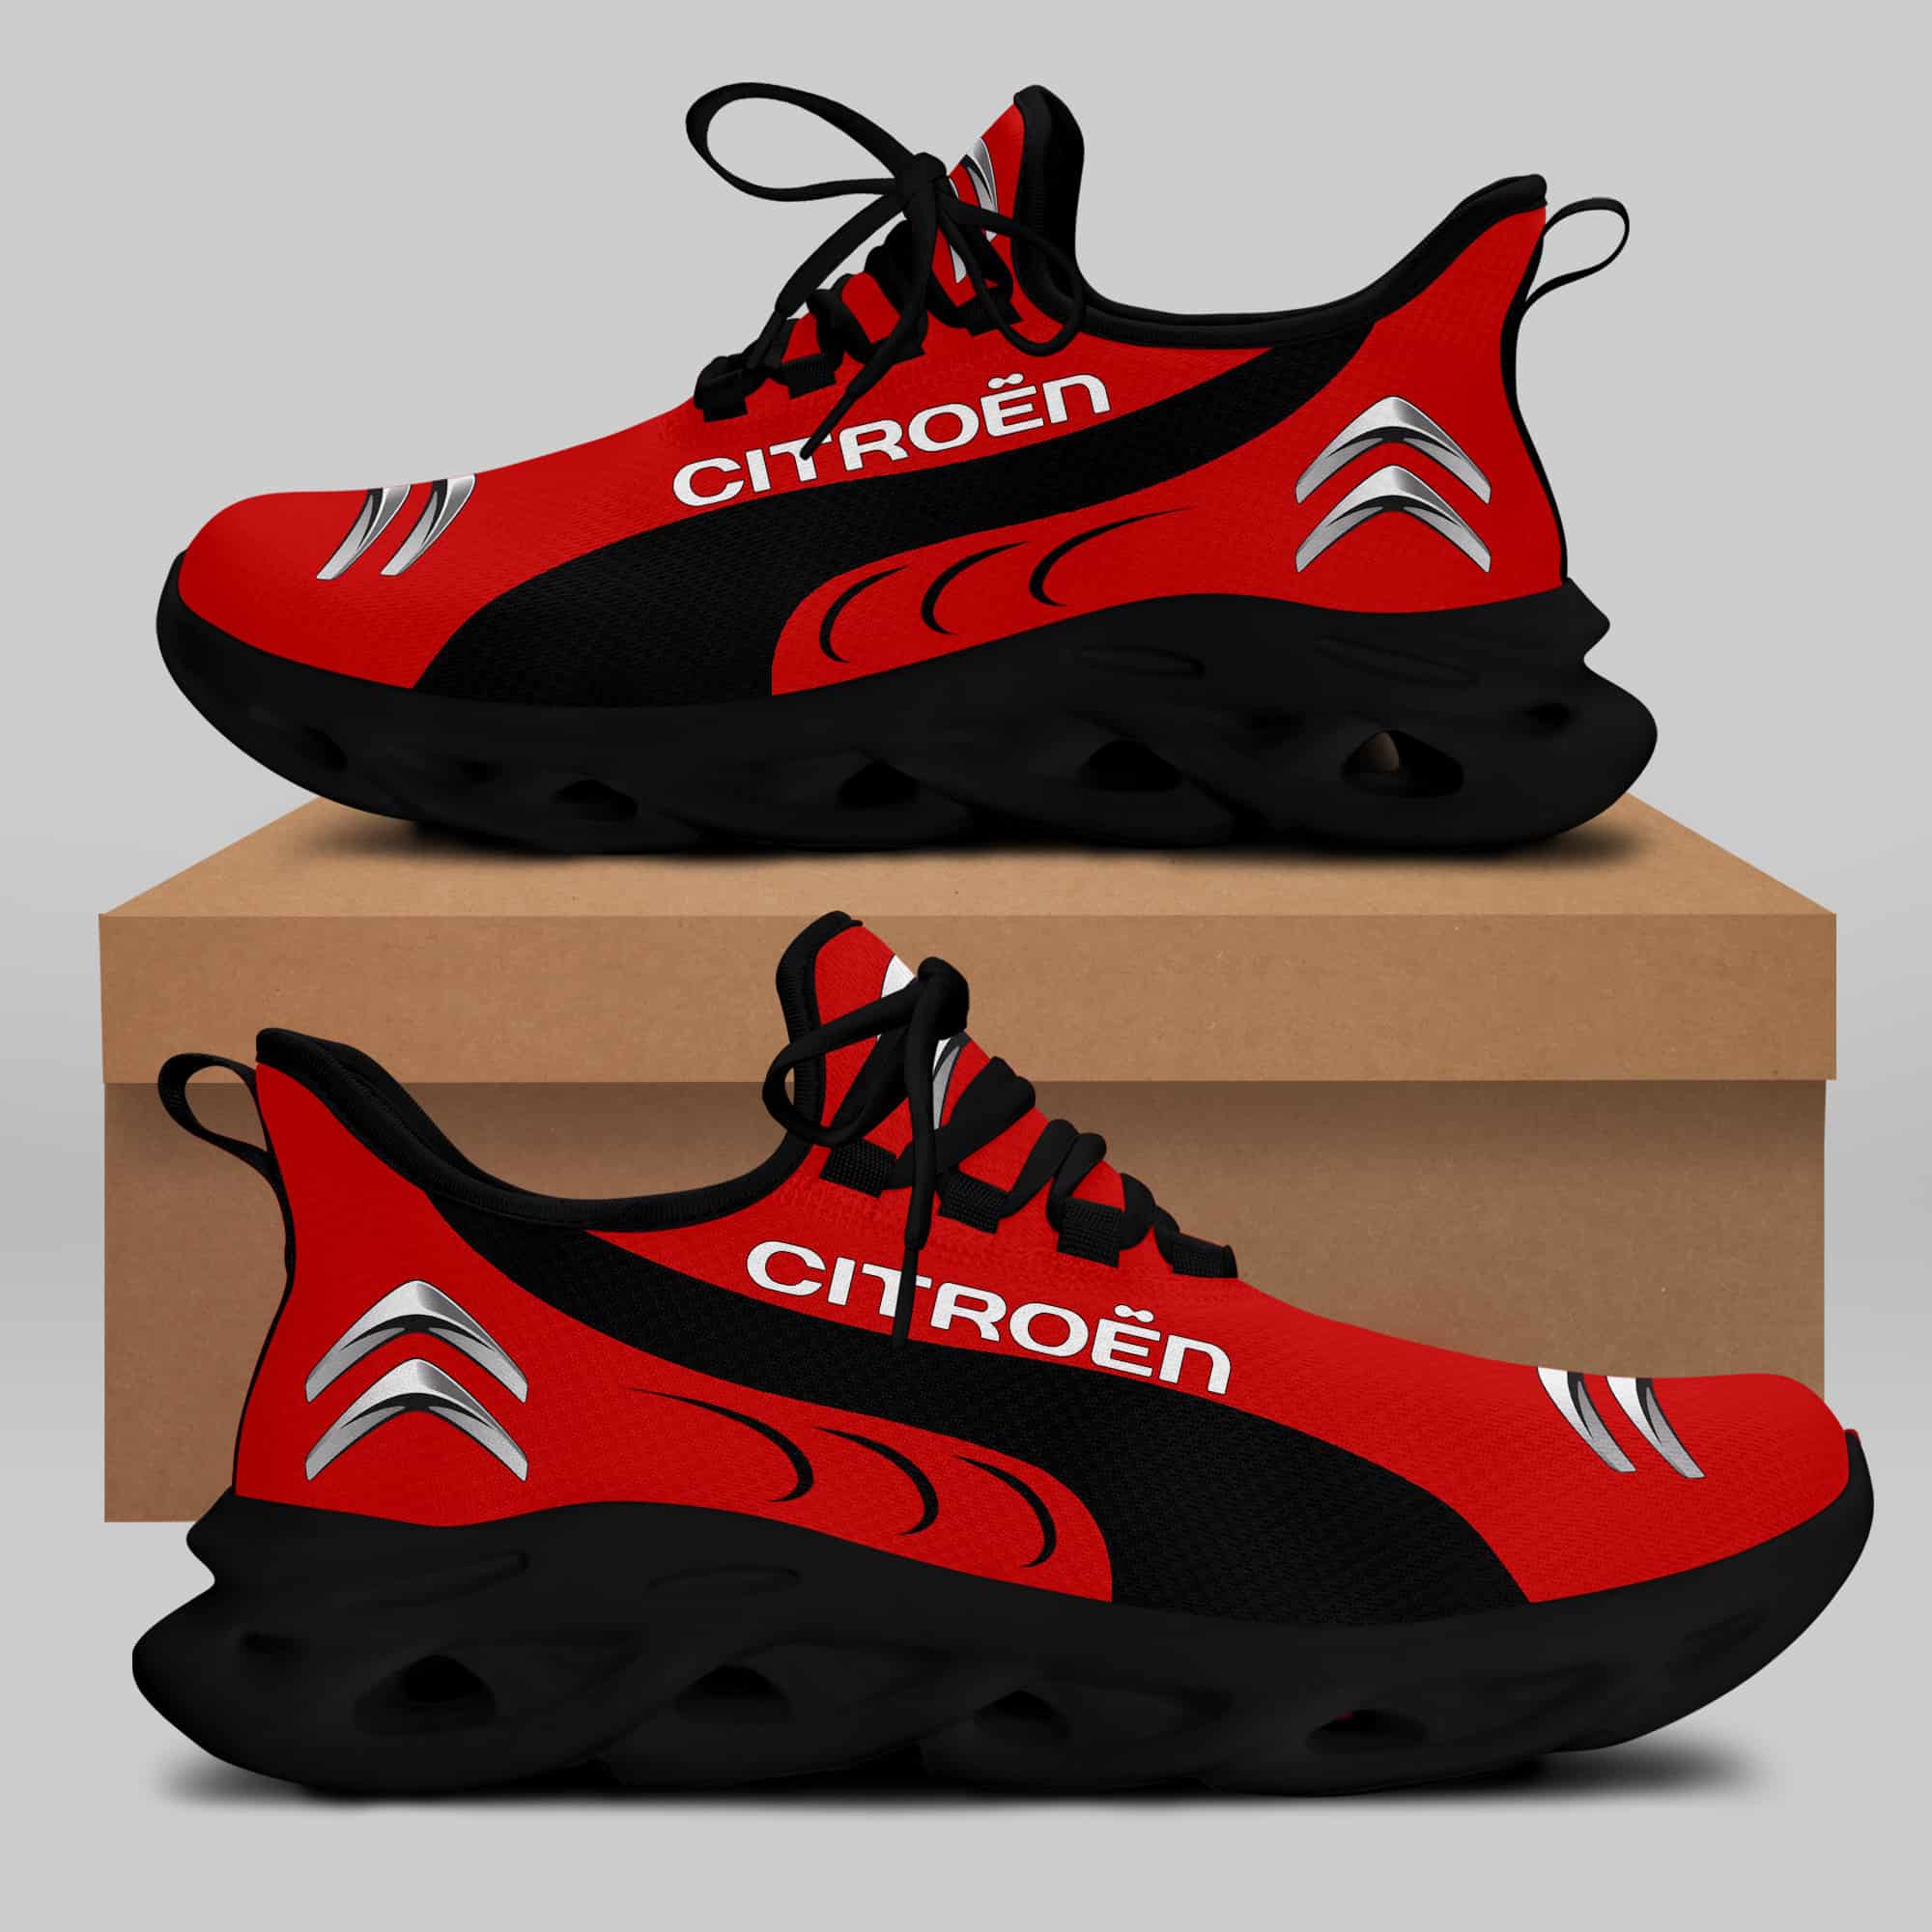 Citroën Running Shoes Max Soul Shoes Sneakers Ver 8 1